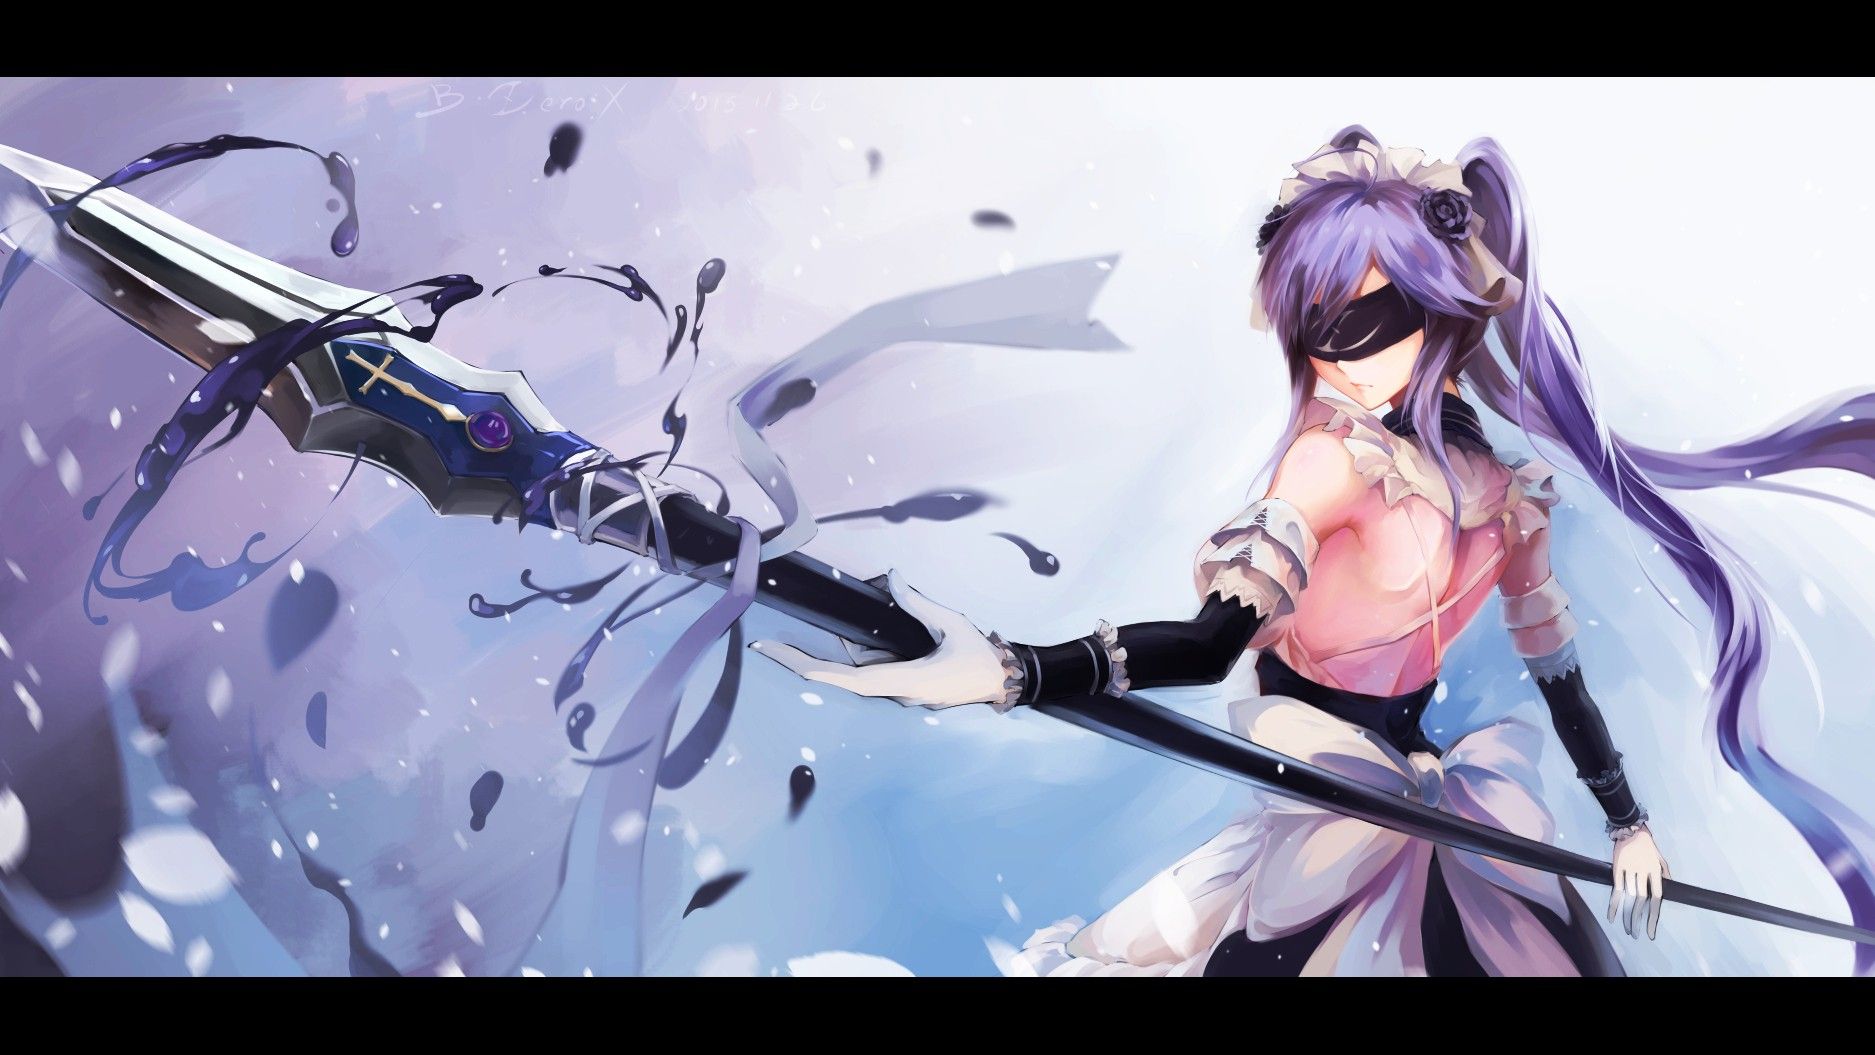 Anime Anime Girls Spear Weapon Purple Hair Twintails Original Characters Wallpaper:1875x1055